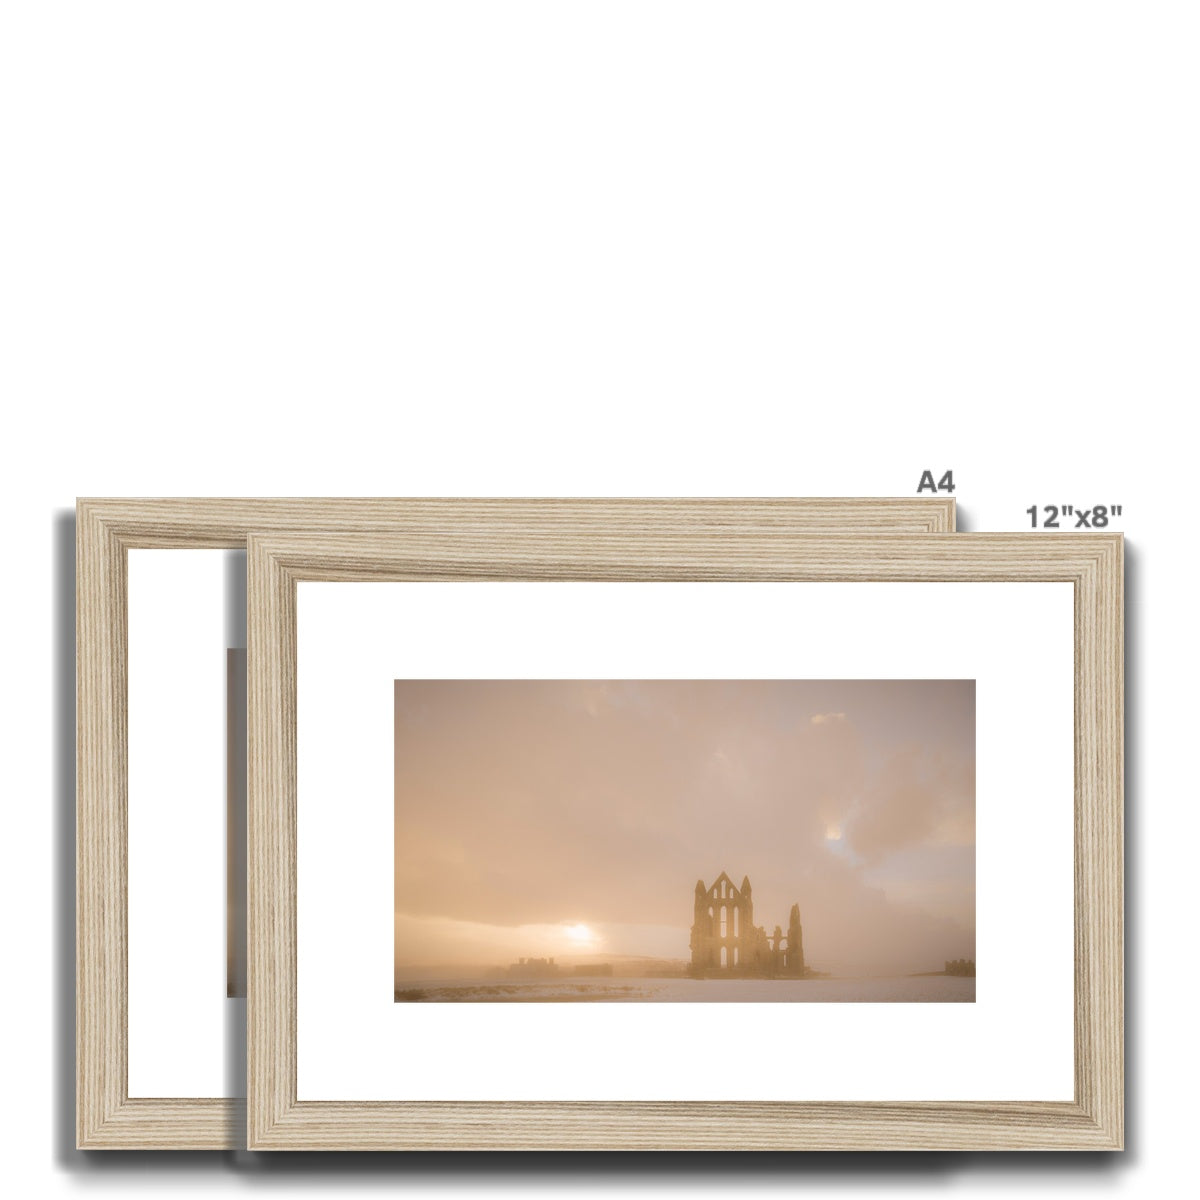 Whitby Abbey in snow, North Yorkshire. UK Framed & Mounted Print